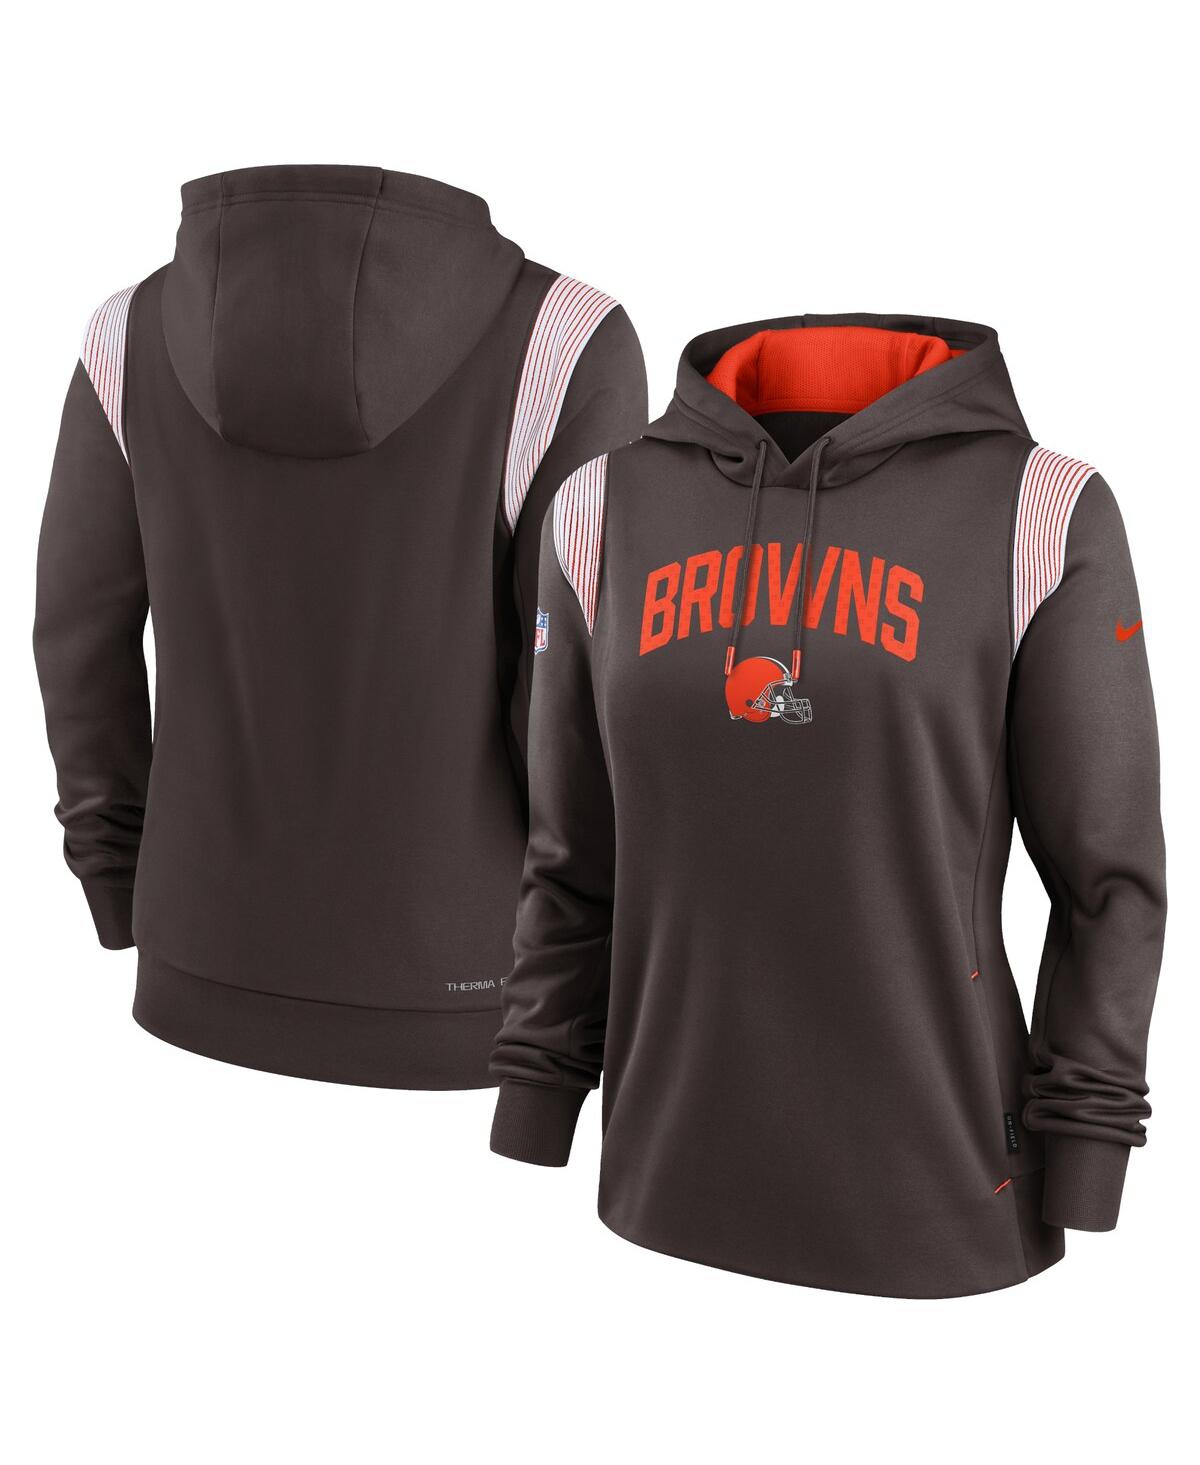 Shop Nike Women's  Brown Cleveland Browns Sideline Stack Performance Pullover Hoodie